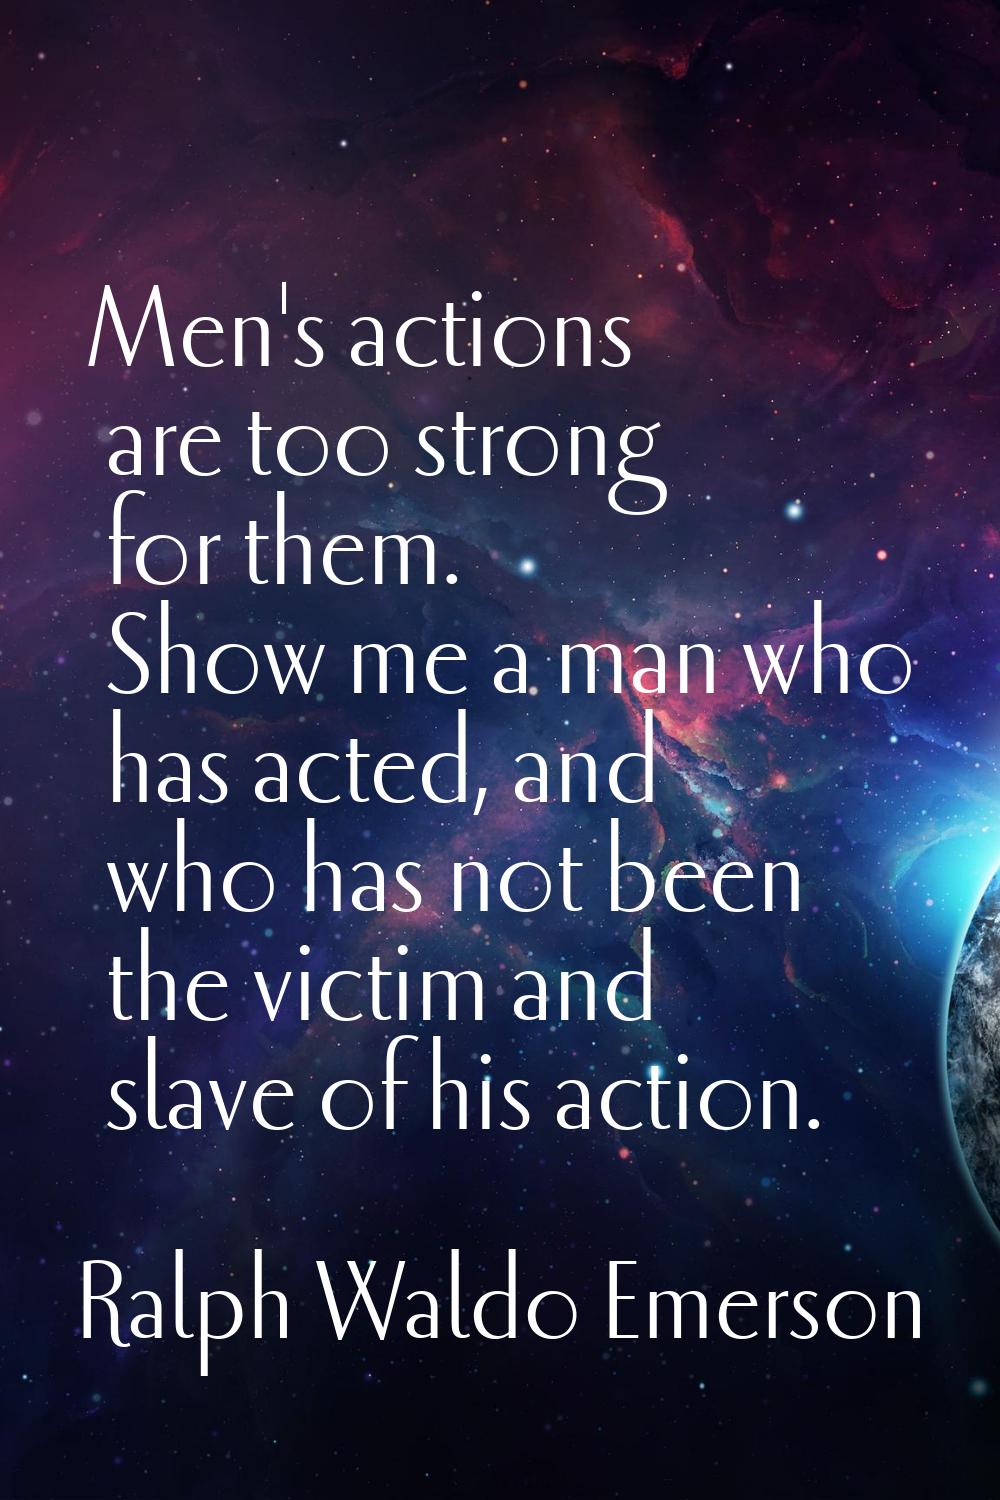 Men's actions are too strong for them. Show me a man who has acted, and who has not been the victim